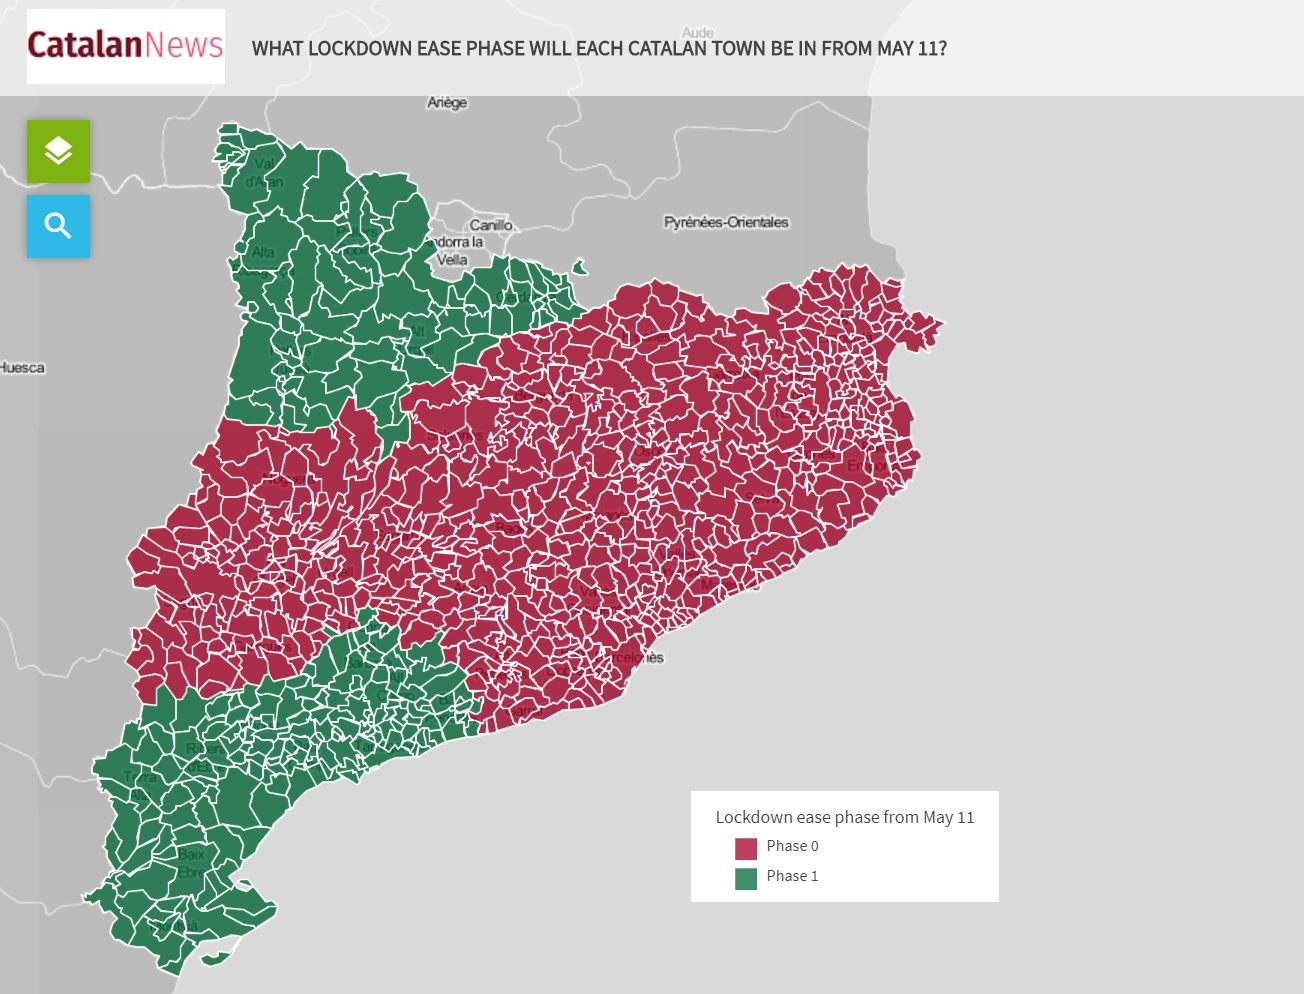 Map with the division of Catalan municipalities by lockdown ease phase from May 11 (by Guifré Jordan)